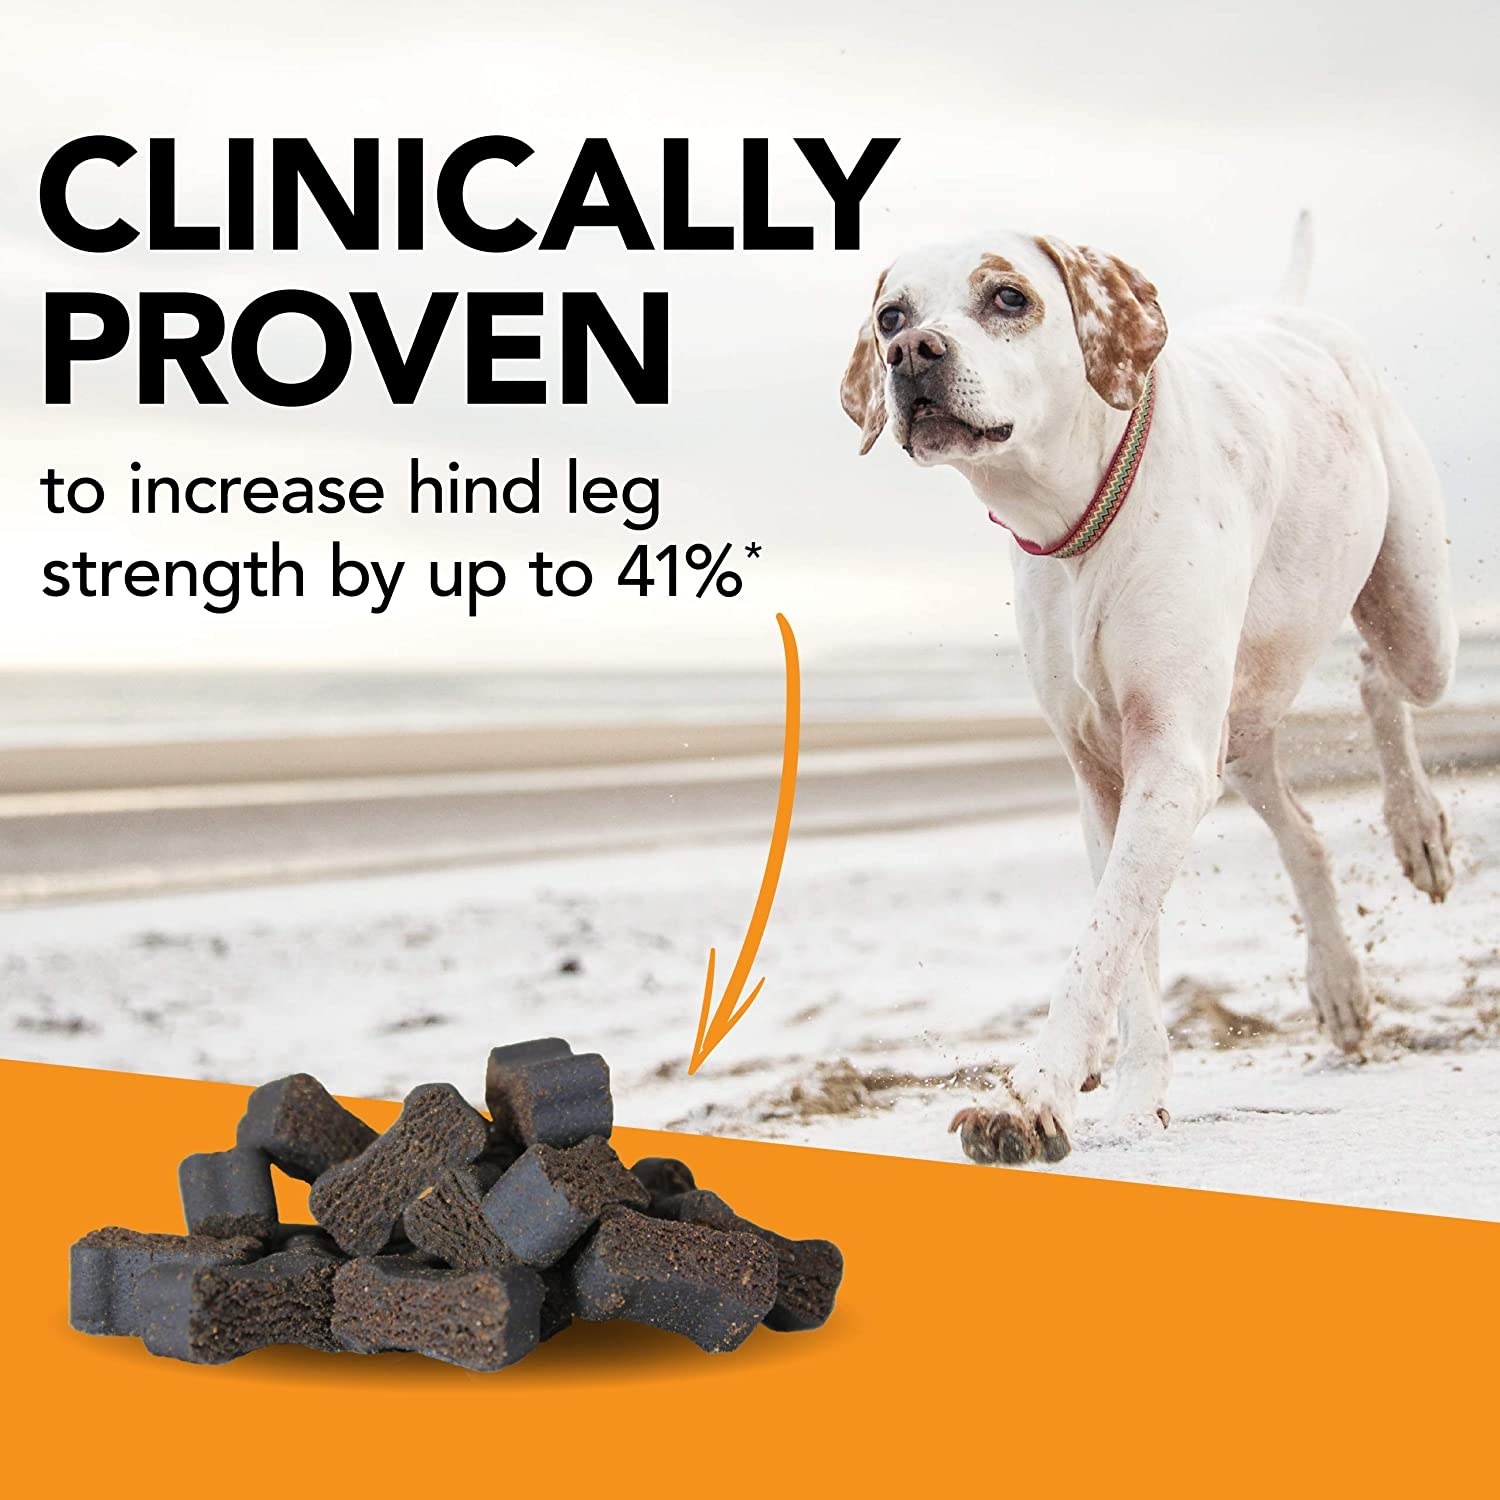 Infographic that shows the treats and says they&#x27;re proven to increase hind leg strength by up yo 41%